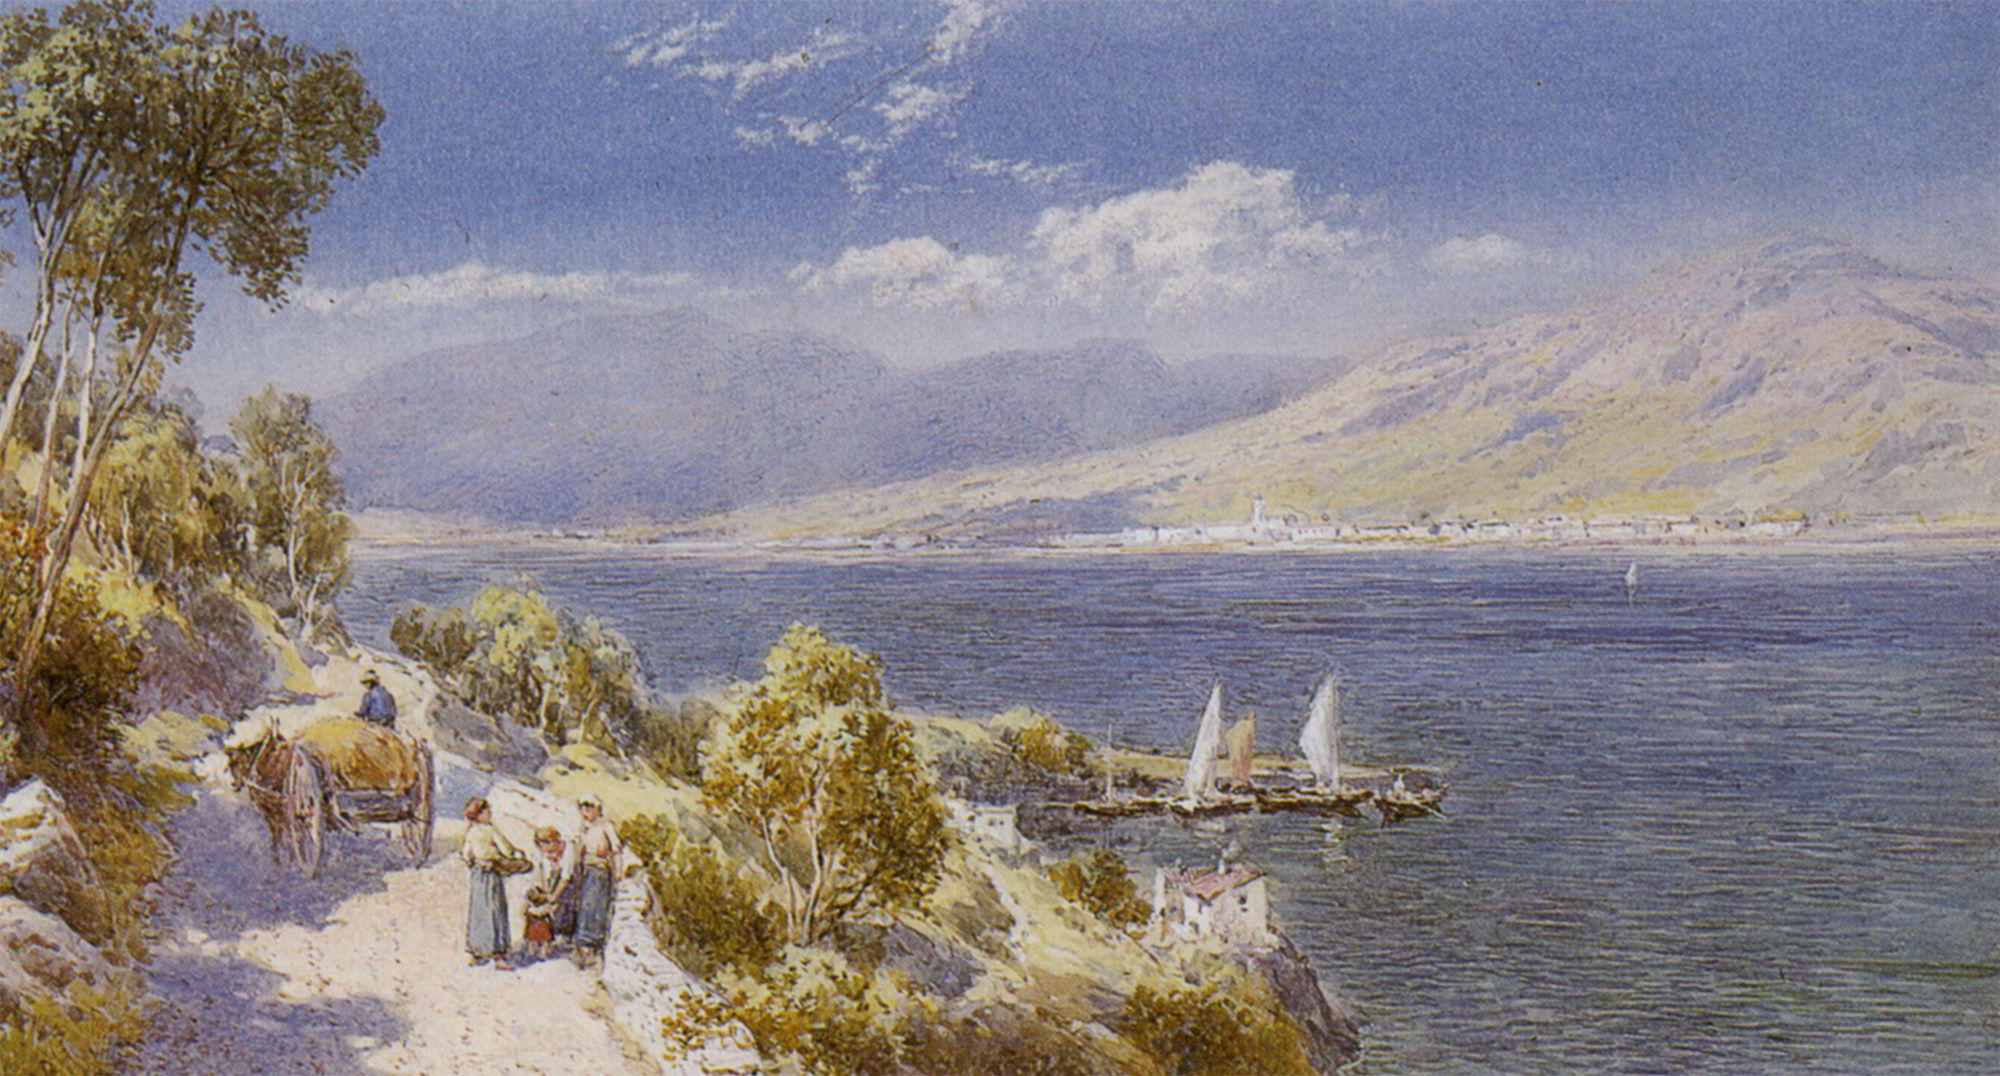 Lake Como with Bellagio in the Distance by Charles Rowbotham-Watercolour Painting